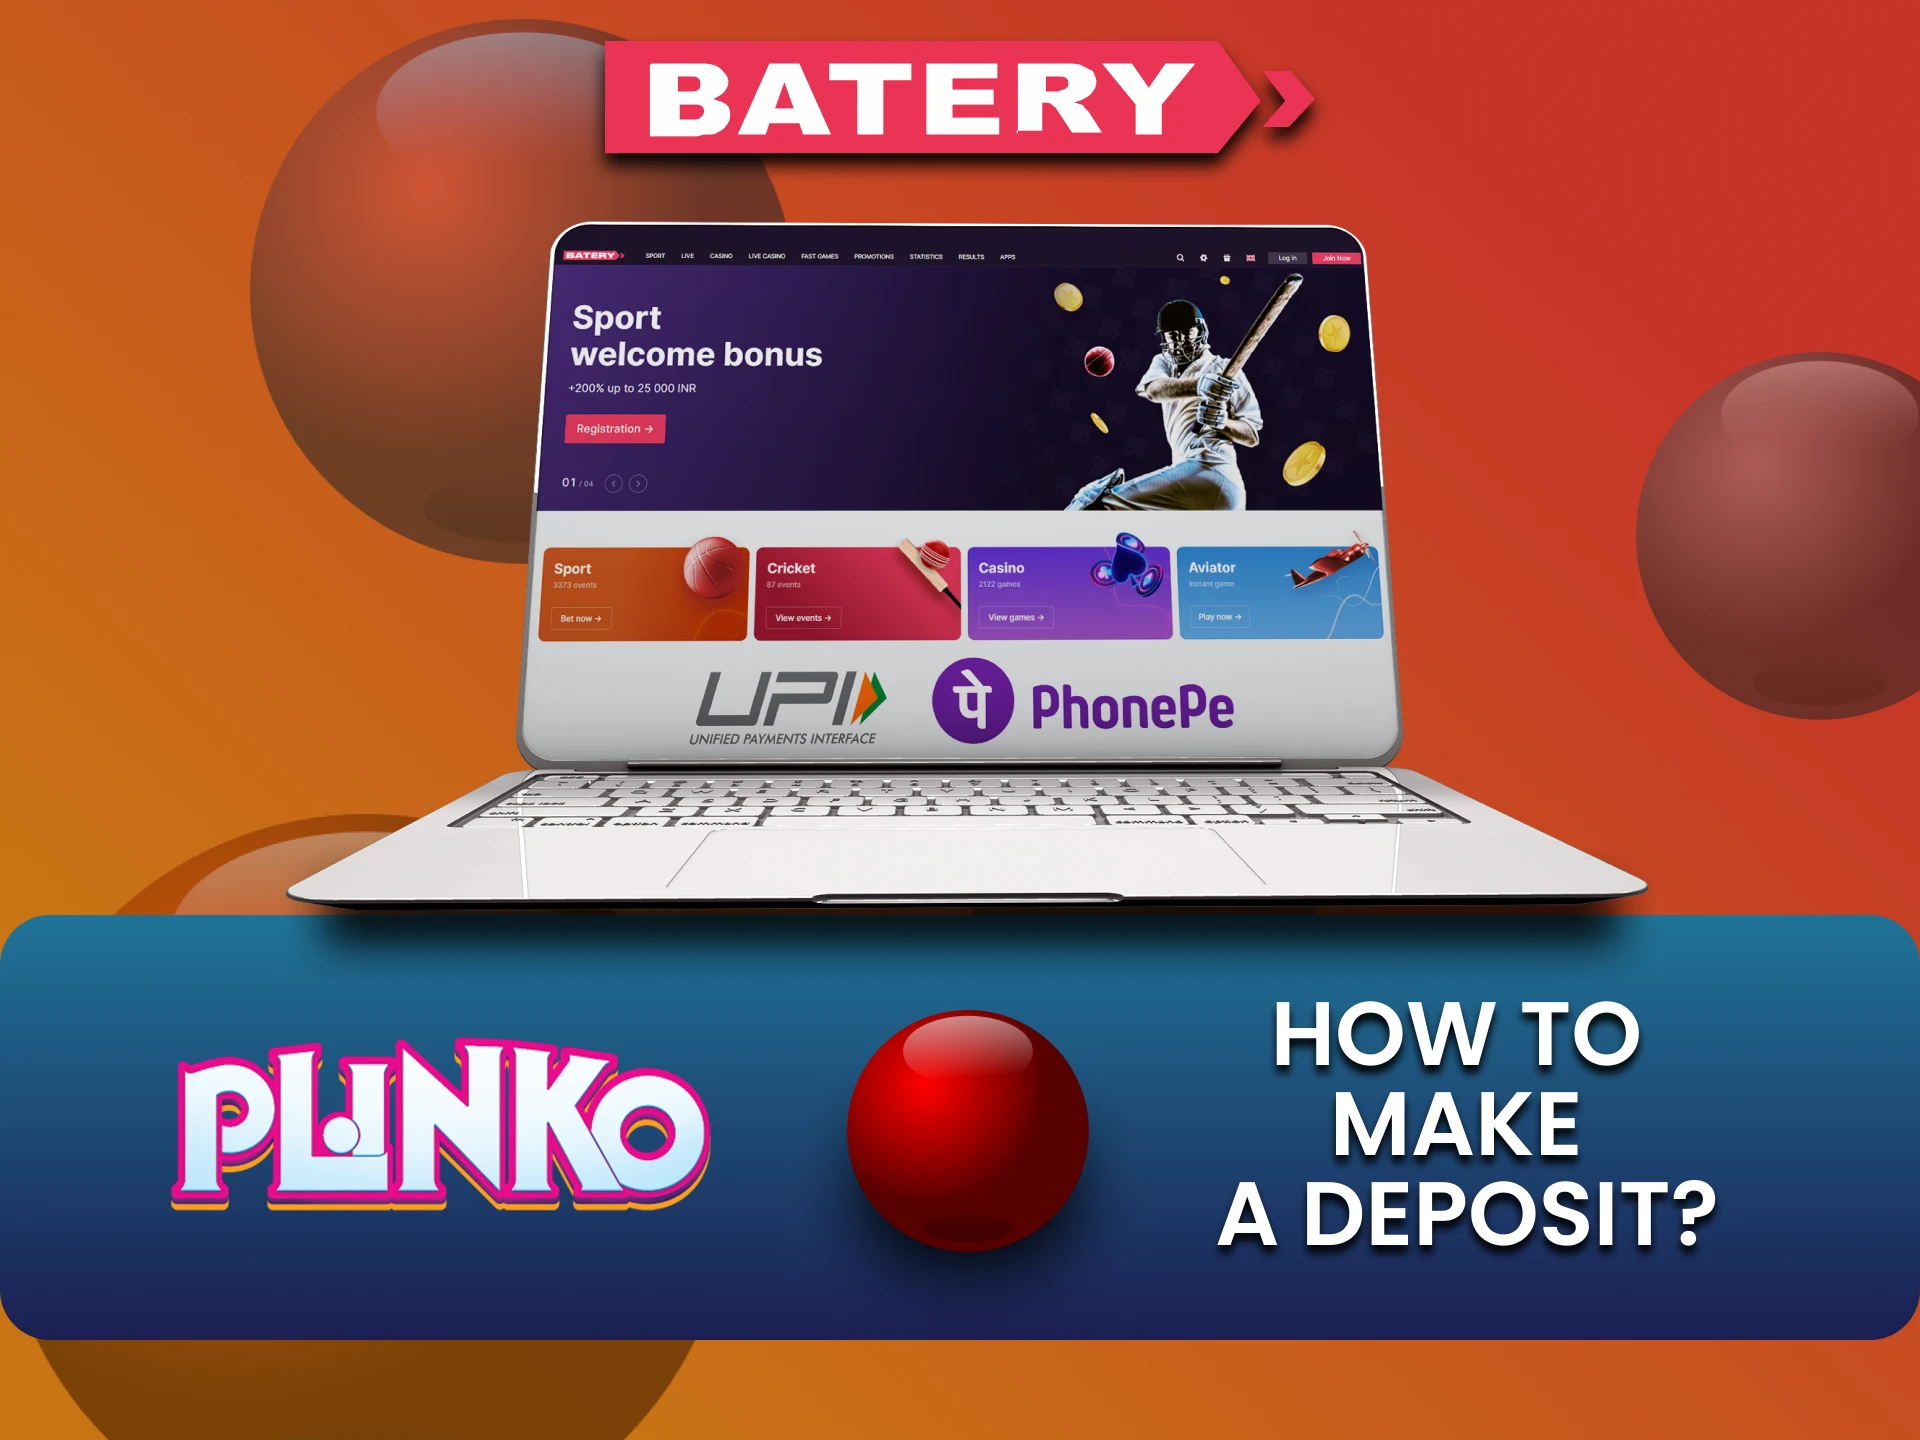 Explore ways to top up your funds on the Batery website for the game Plinko.